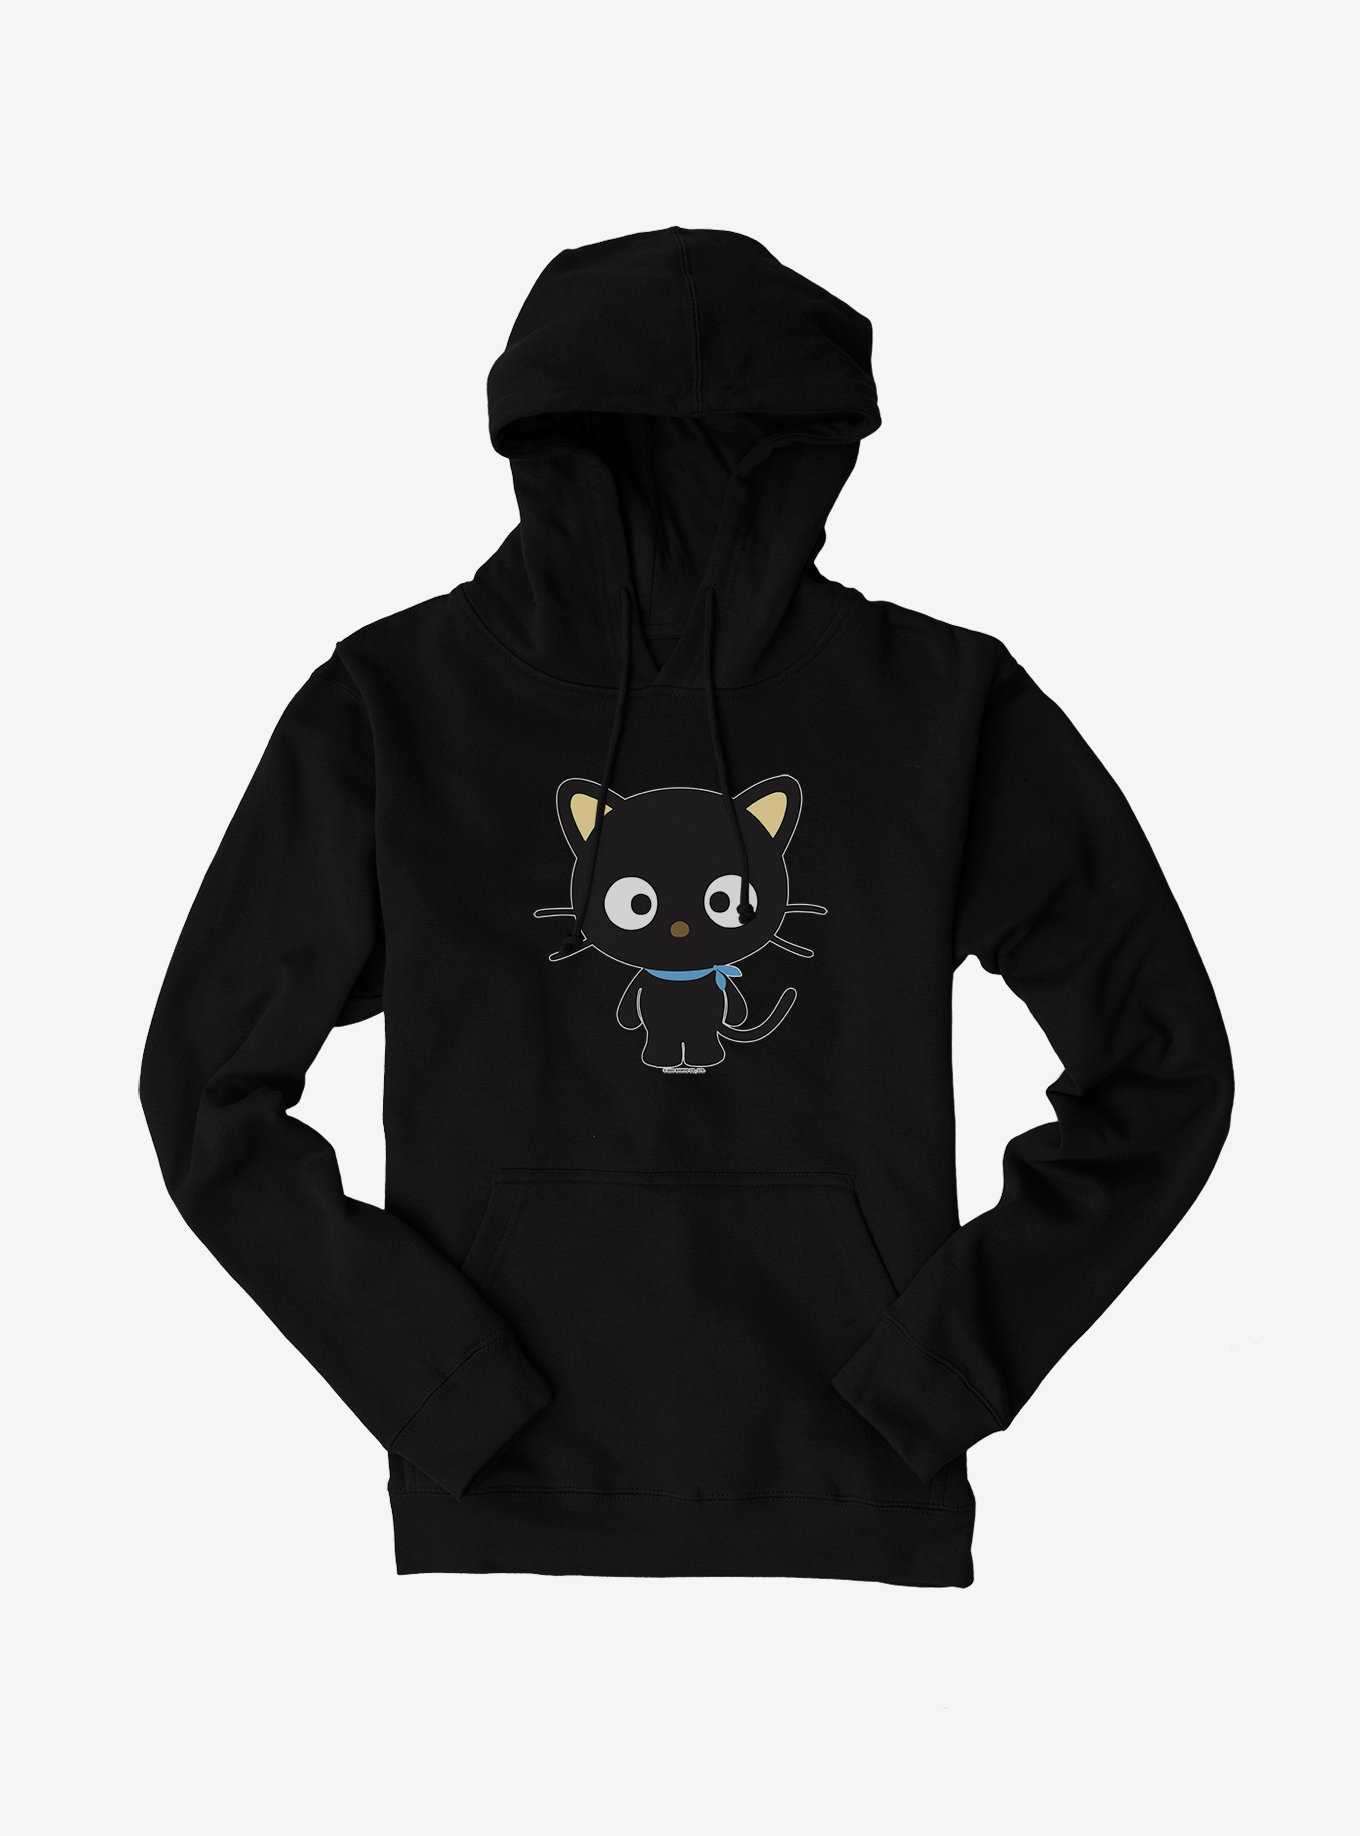 Chococat At Attention Hoodie, , hi-res